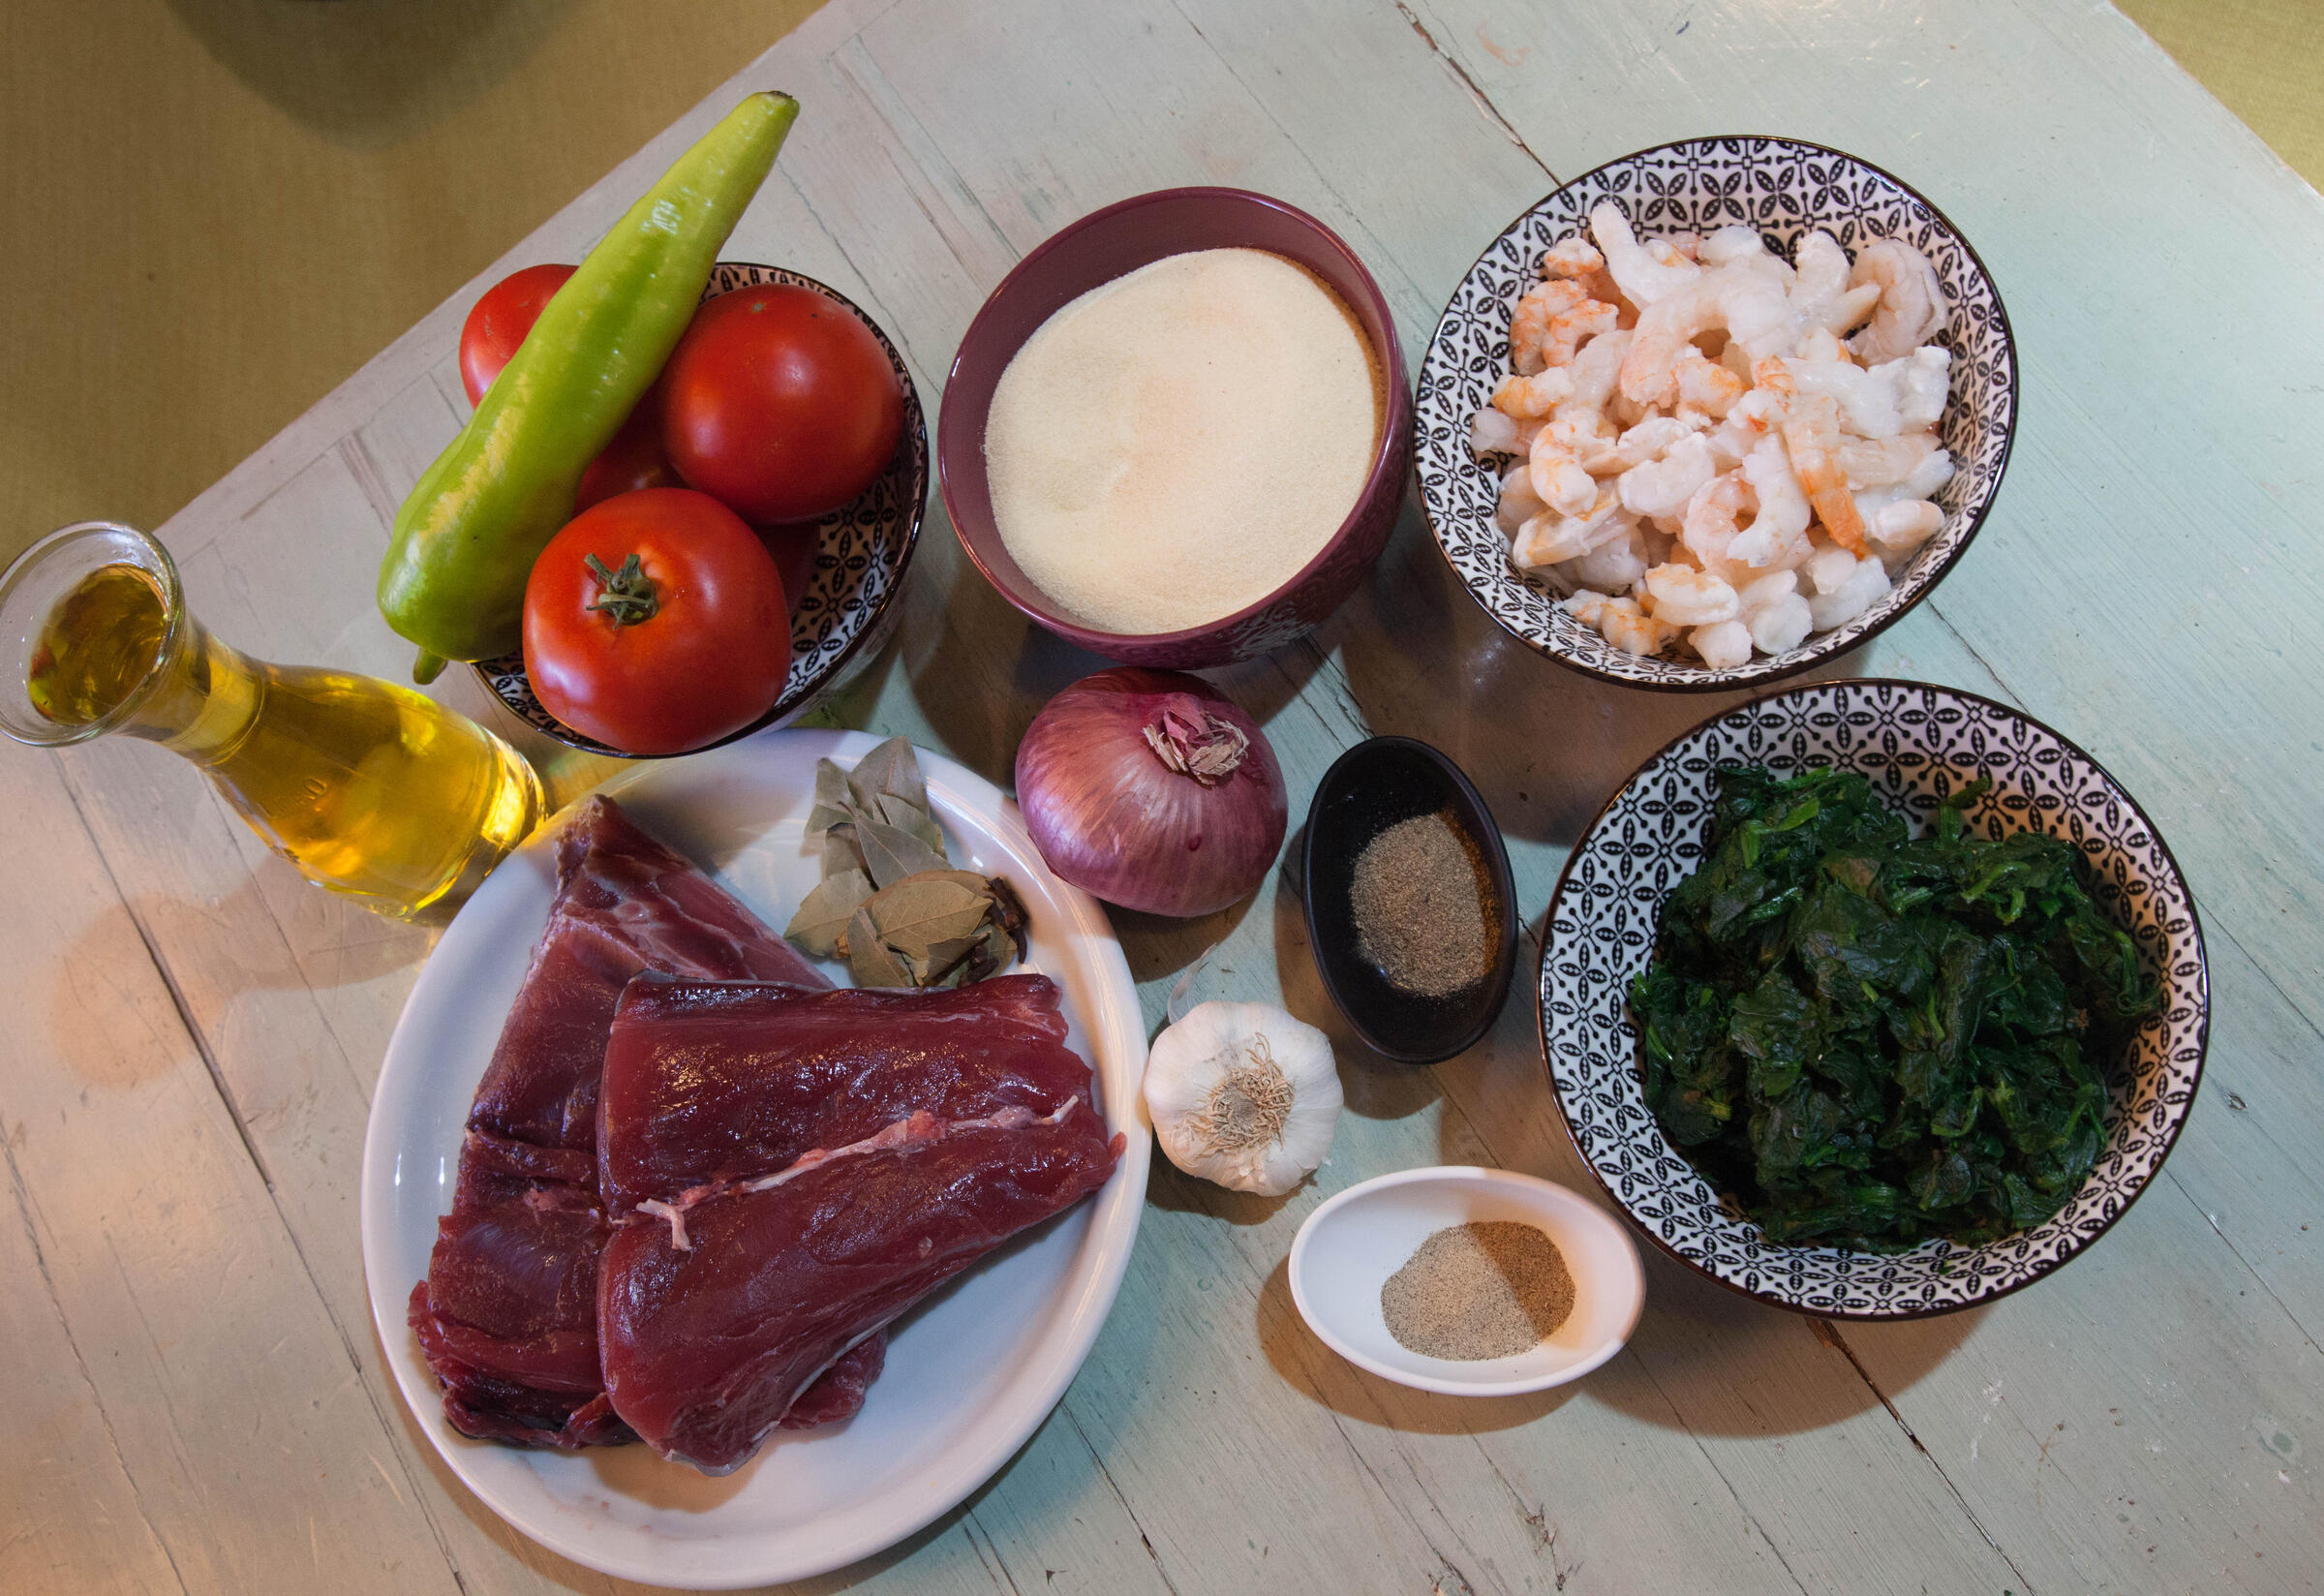 Raw tuna, tomatoes, spinach, garlic, onions, and other ingredients laid out on a table.